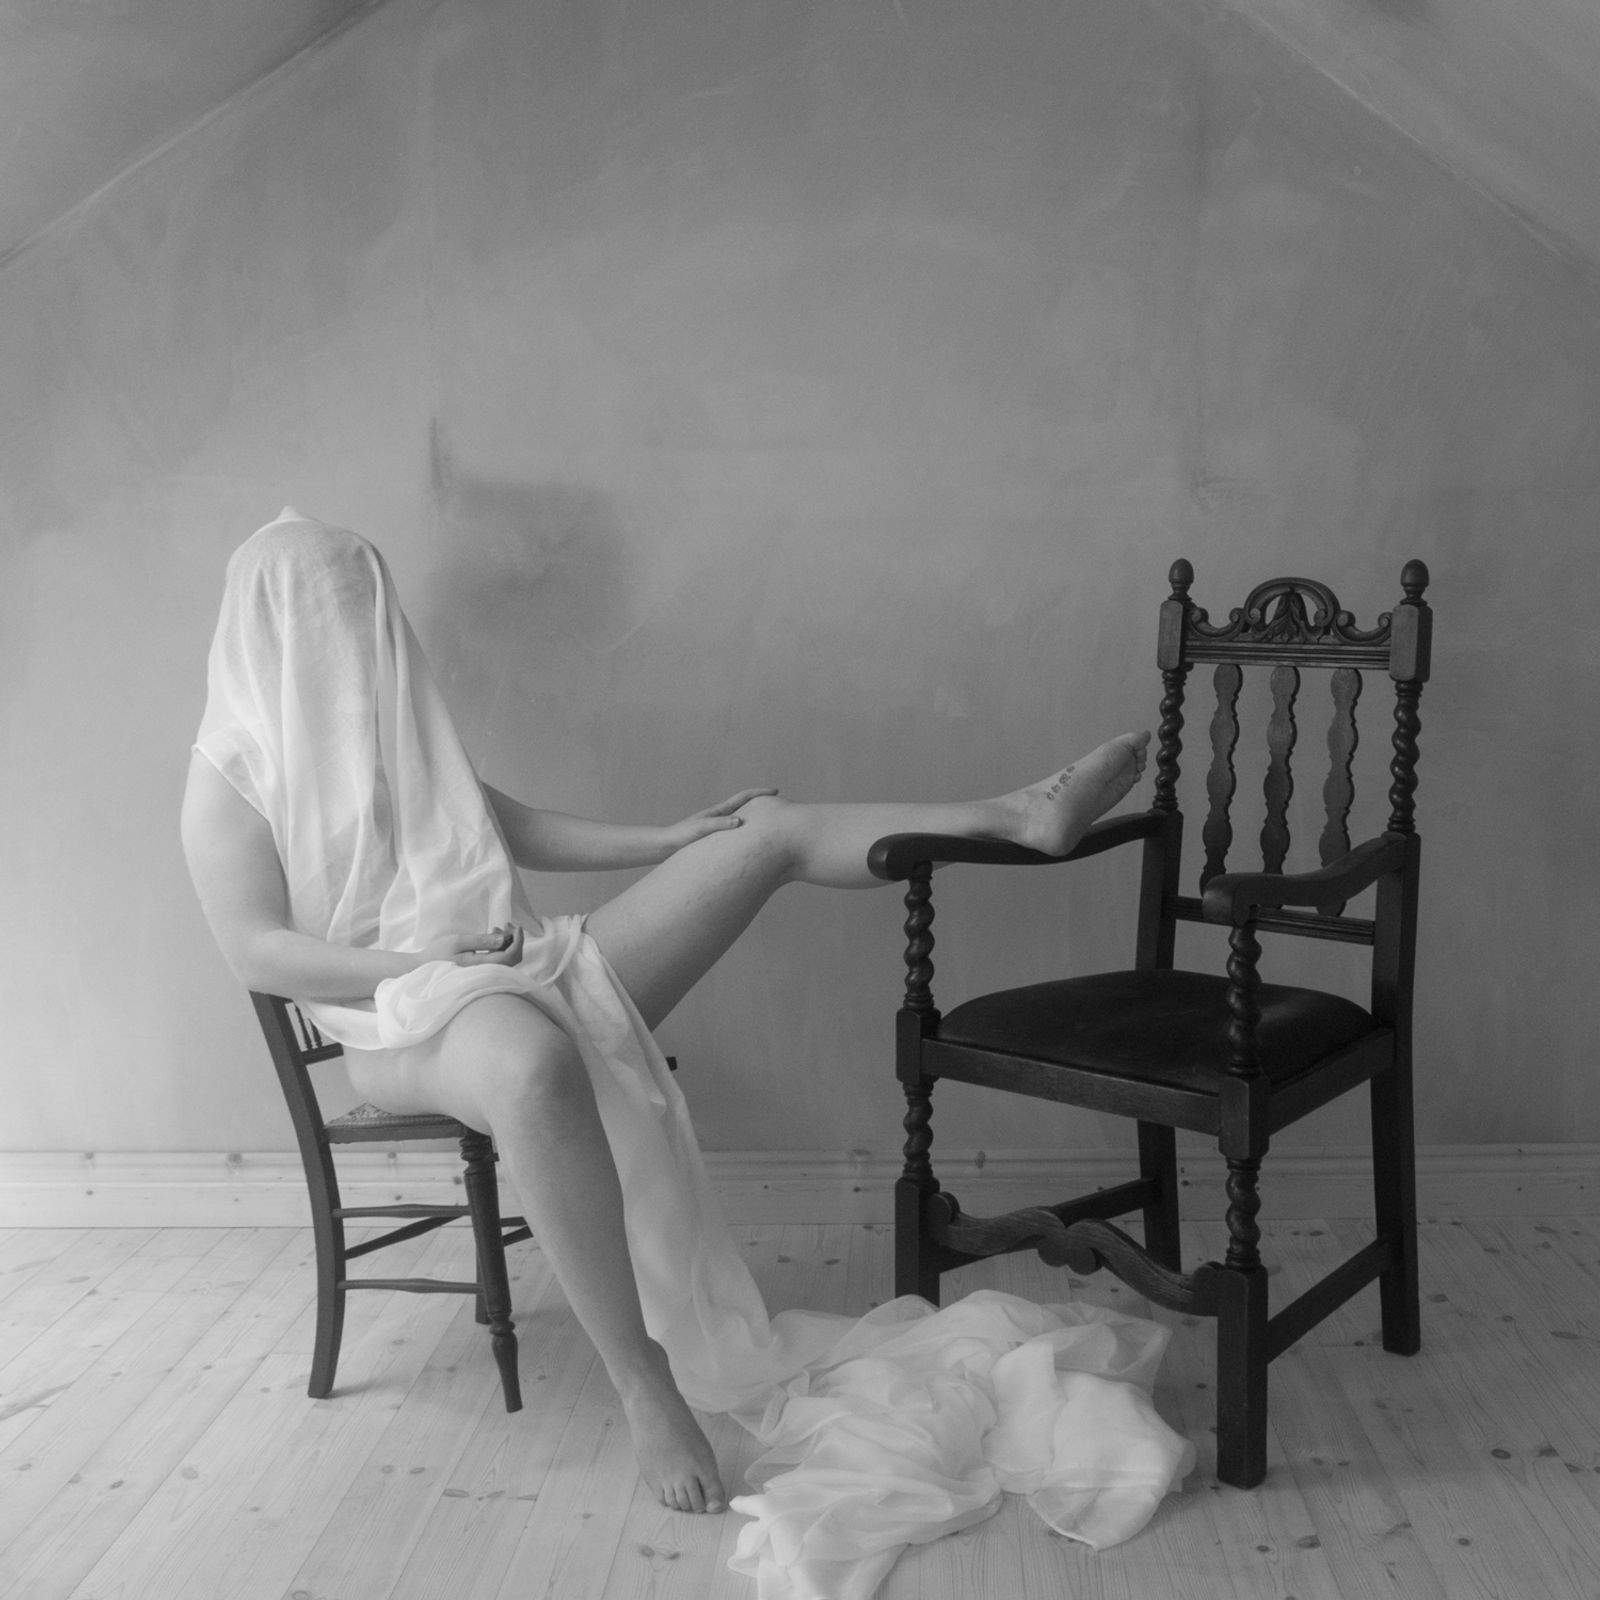 © Roisin White - Image from the Lay Her Down Upon Her Back photography project